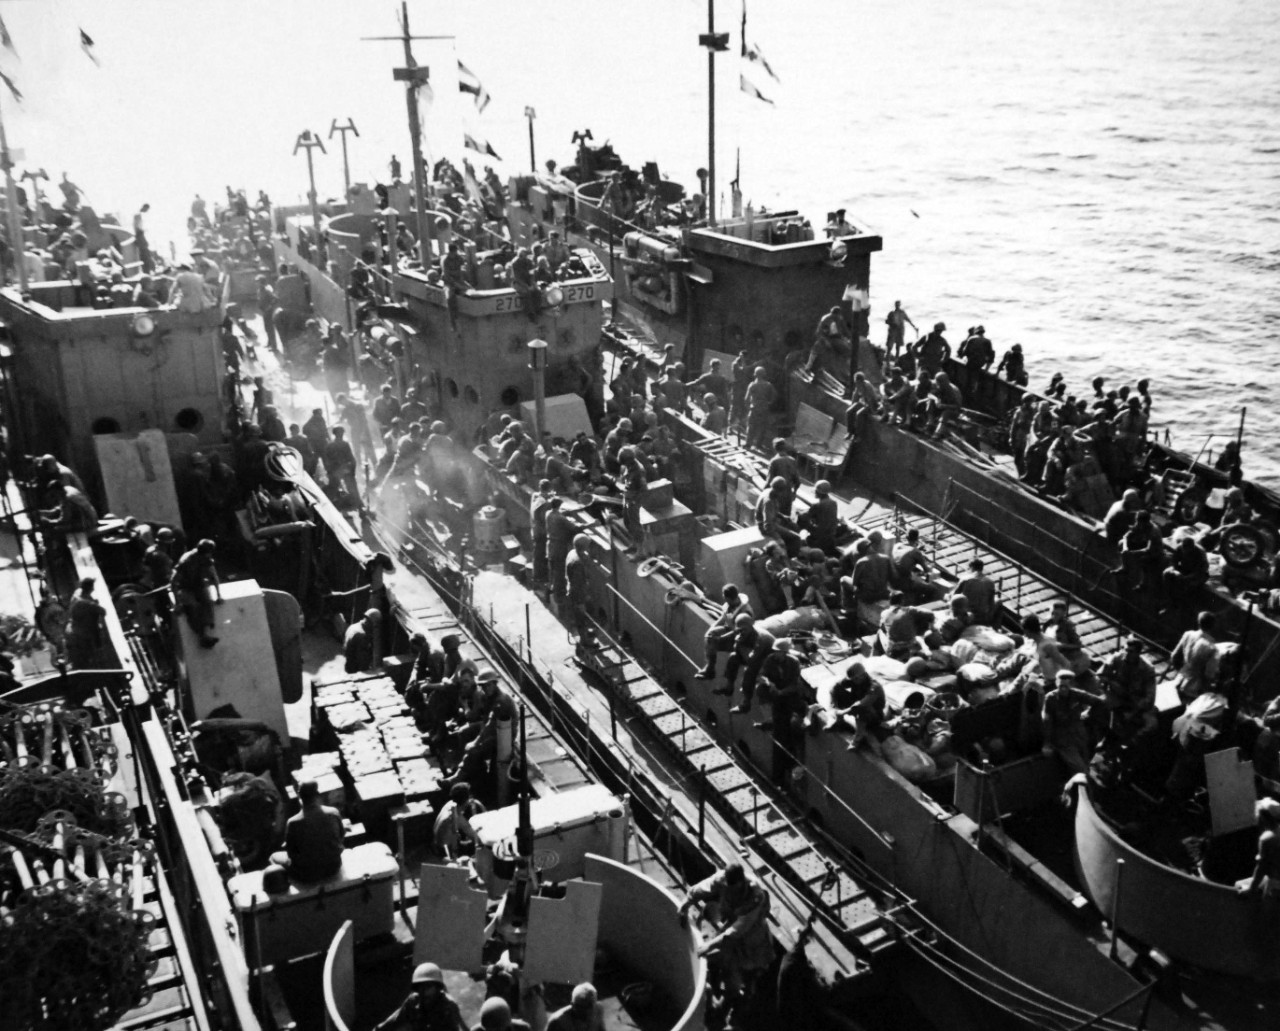 80-G-87395:  Operation Avalanche, September 1943.  American air-borne troops rest aboard English LCI’s before going into battle for Salerno, Italy.    Photograph released September 12, 1943.     U.S. Navy photograph, now in the collections of the National Archives.  (2017/04/04).